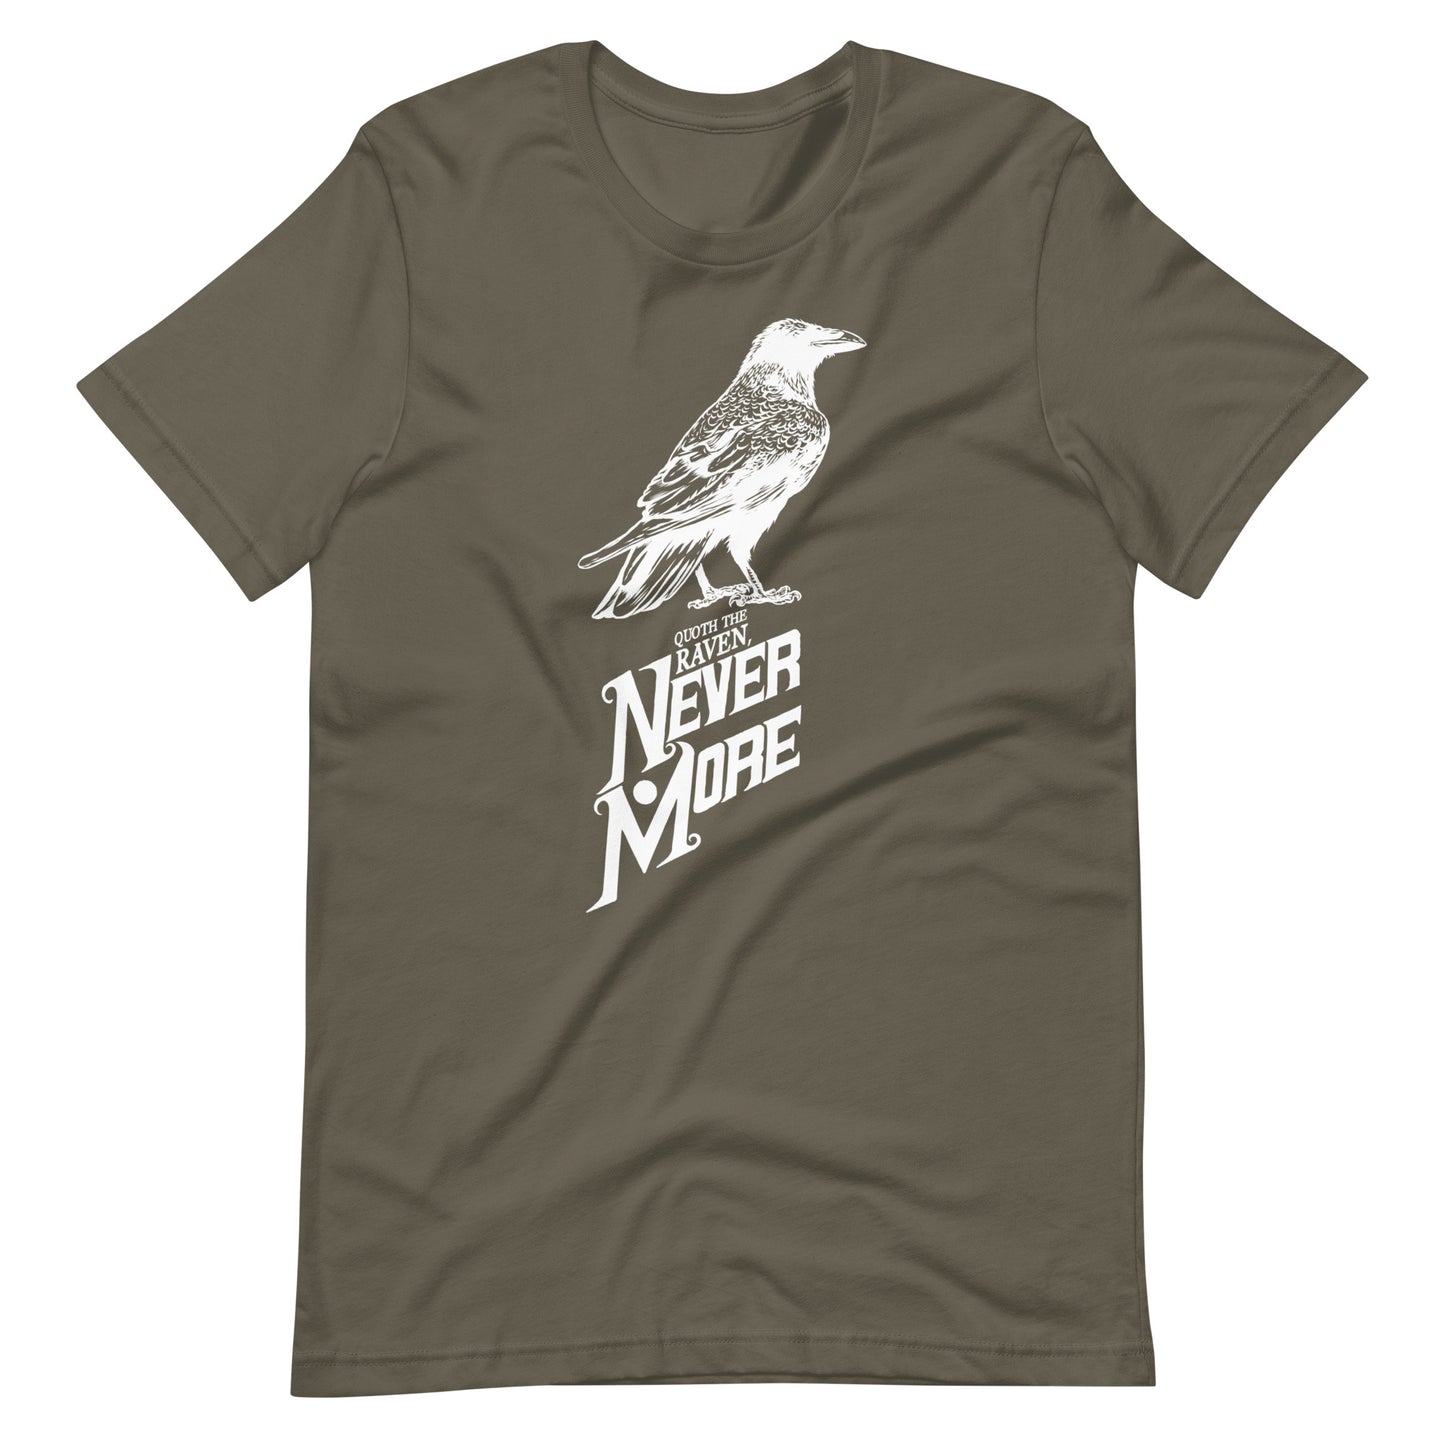 Quoth the Raven Nevermore - Men's t-shirt - Army Front